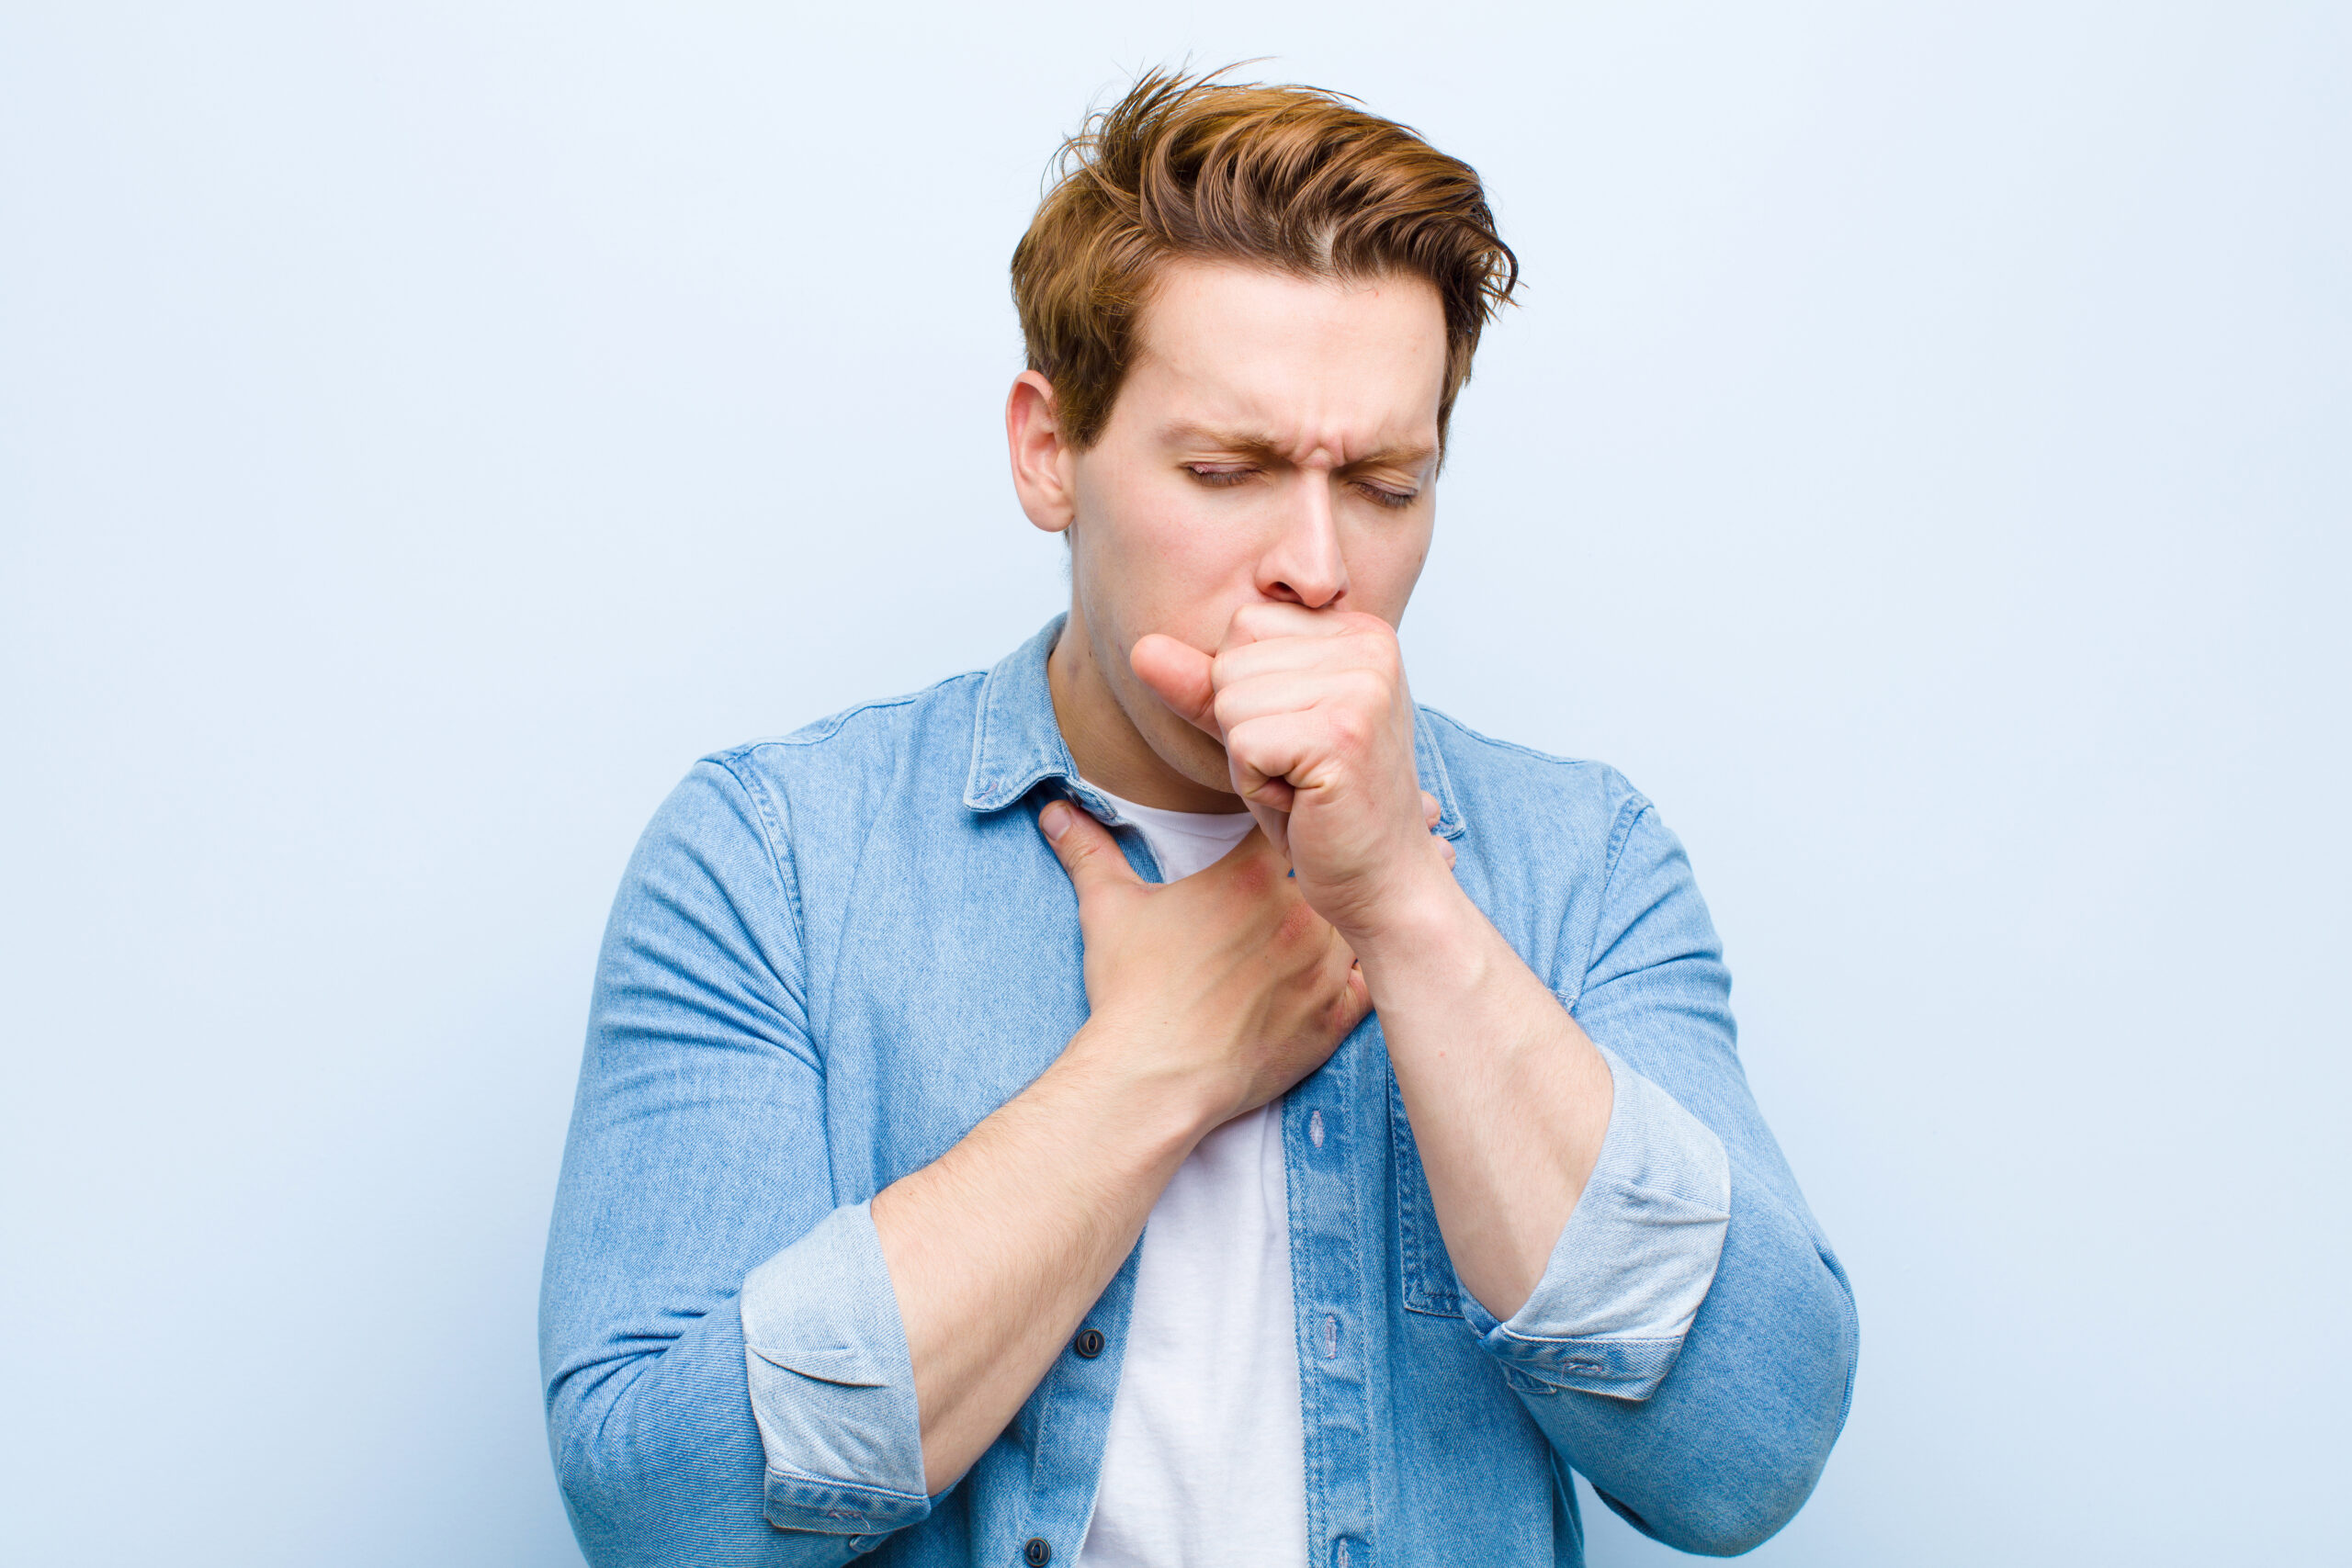 Signs You Have an Acute Upper Respiratory Infection